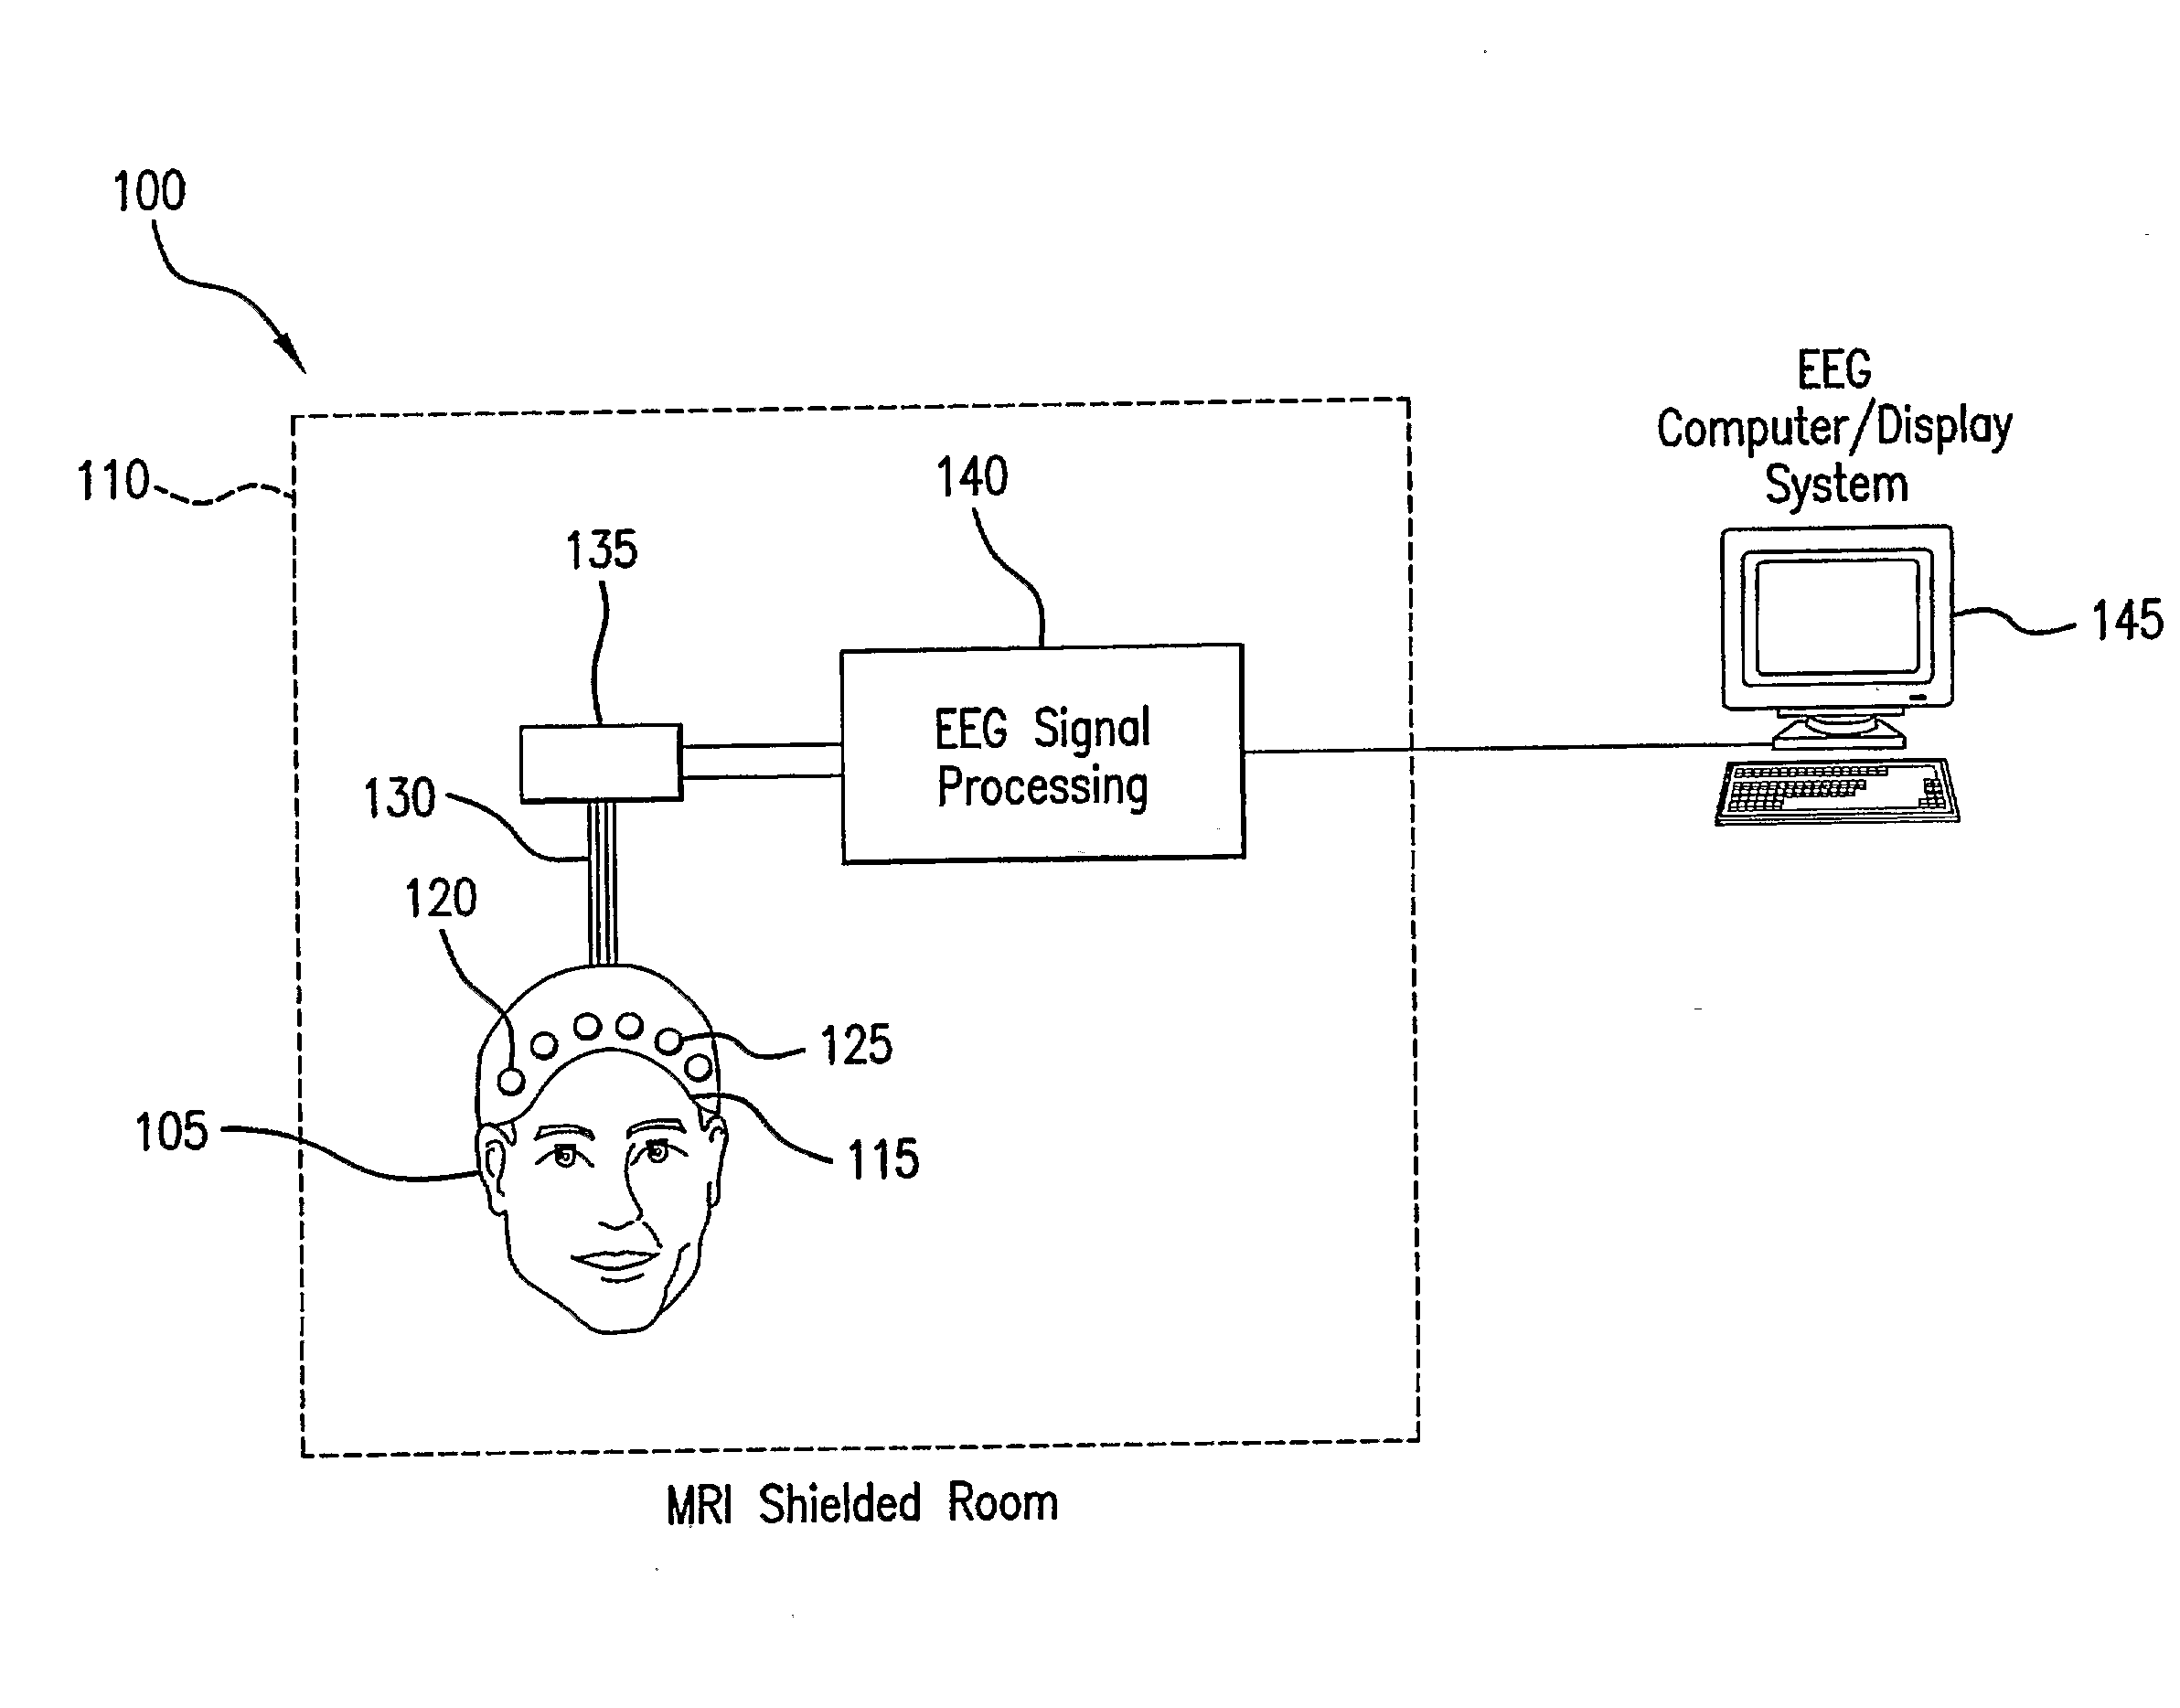 Apparatuses and Methods For Electrophysiological Signal Delivery and Recording During Mri